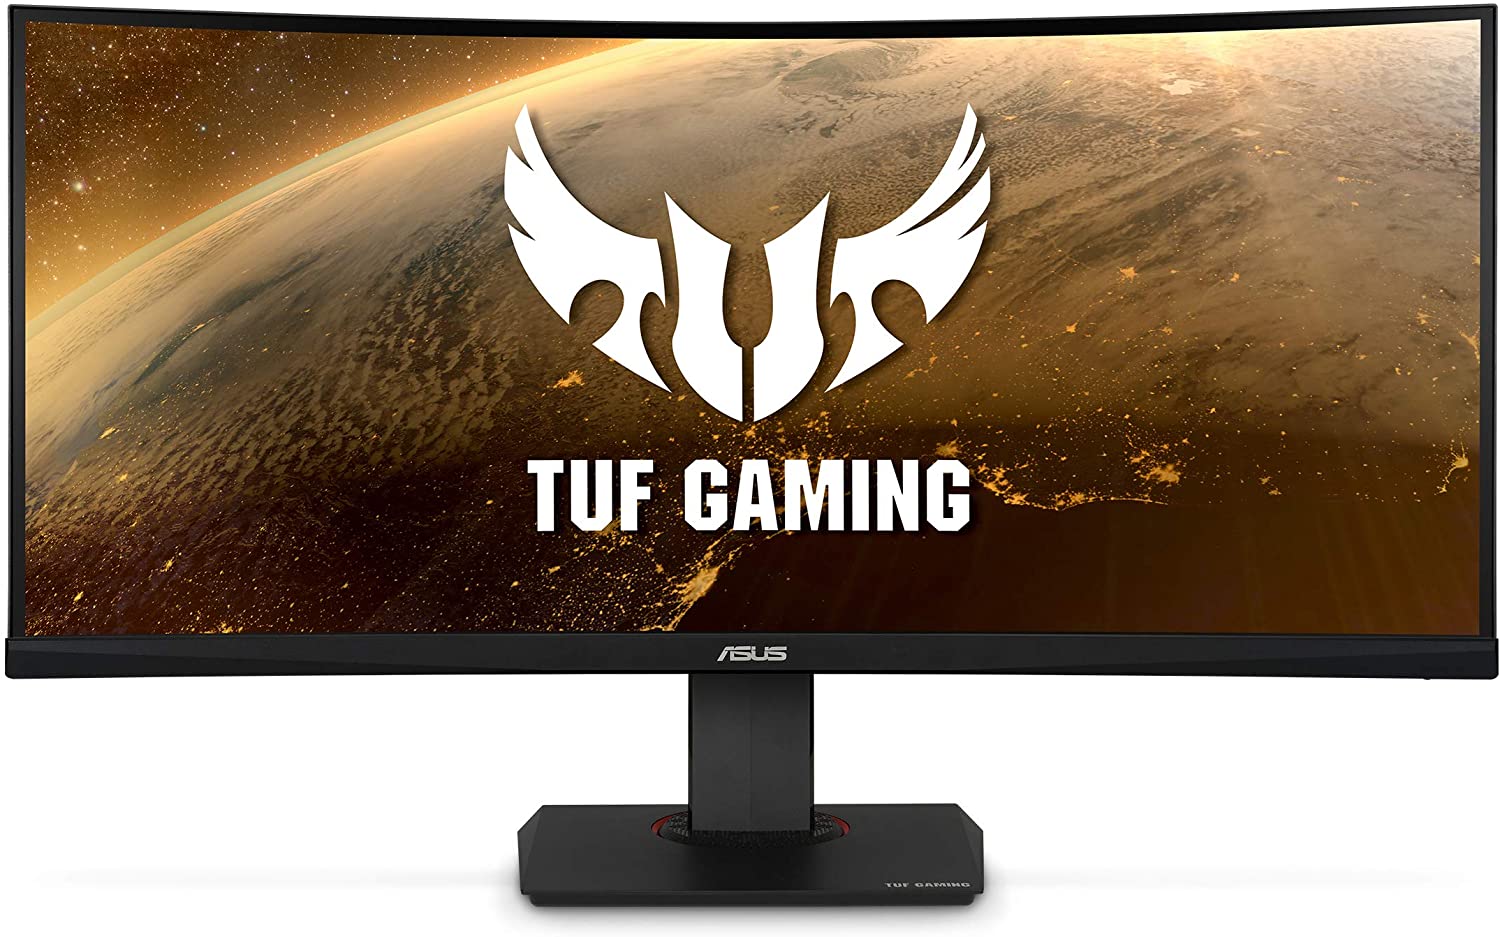 35" Asus TUF Gaming VG35VQ 3440x1440 Curved 100Hz Eye Care HDR Monitor $380 + free s/h at Amazon